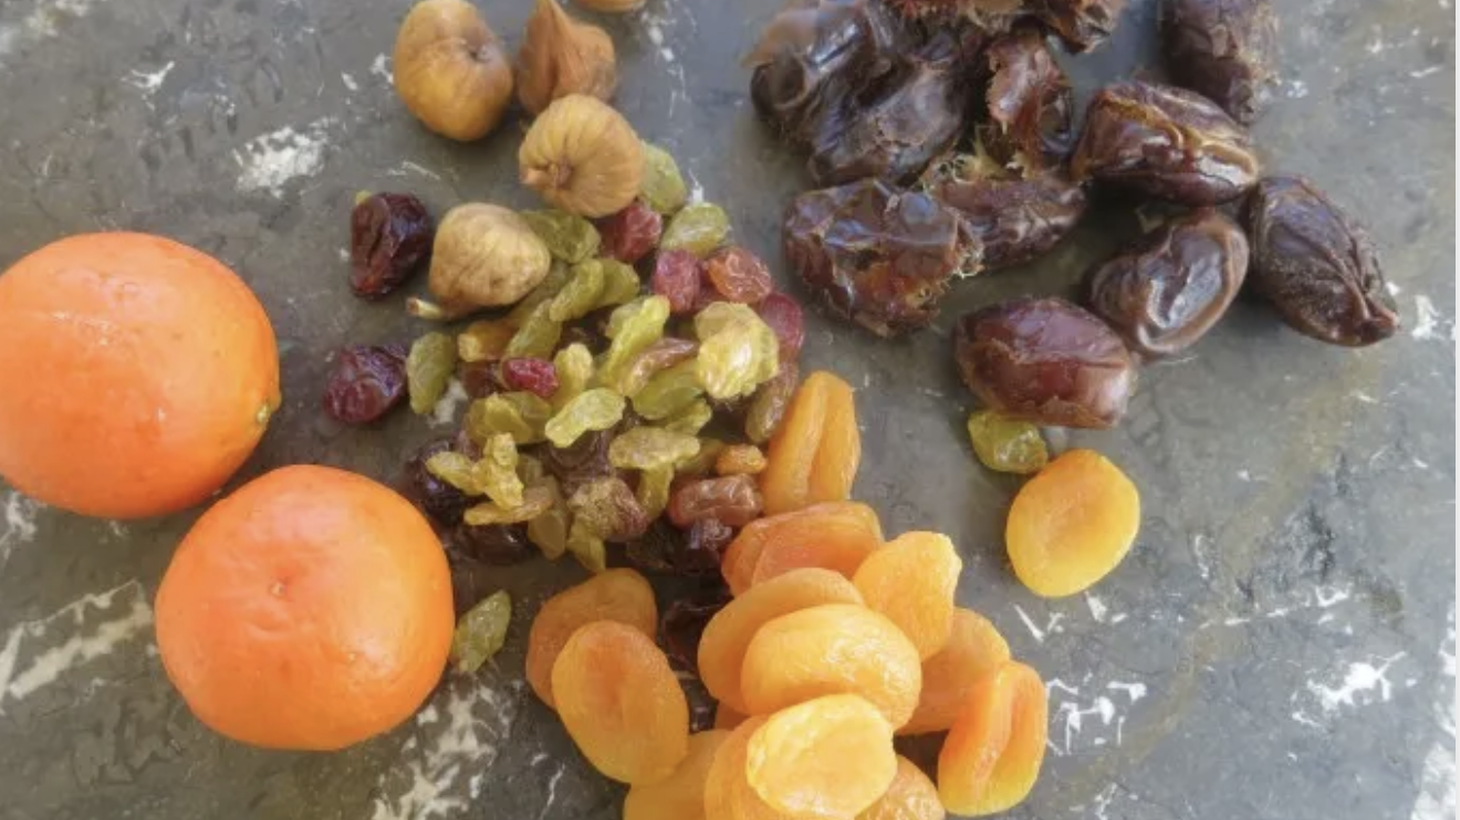 A Turkish-inspired charoset has whole oranges and a mixture of dried fruits.